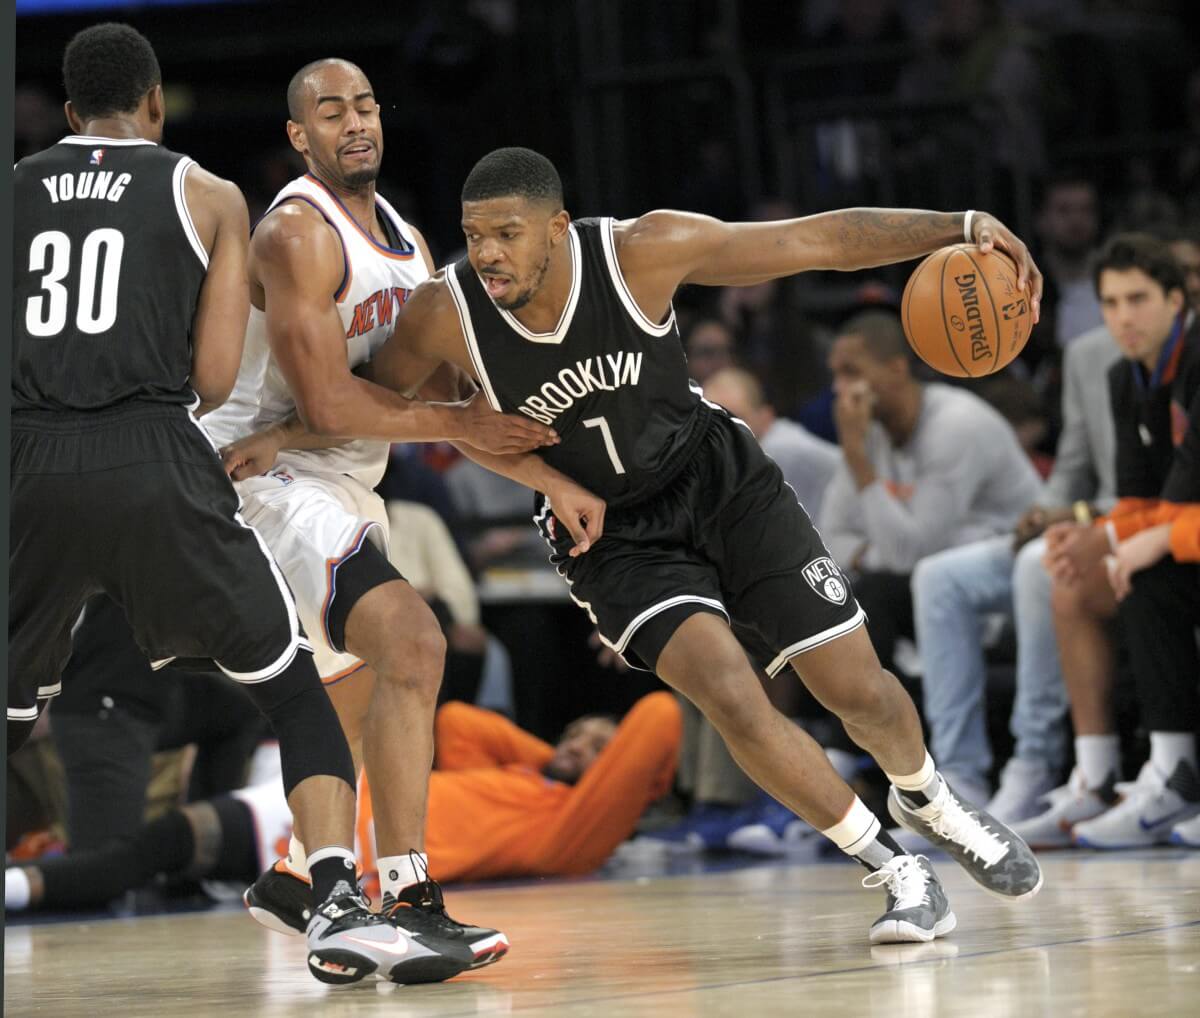 New York Knicks guard Arron Afflalo runs into a pick set by Thaddeus Young (30) as Afflalo guards Nets guard Joe Johnson (7) during the third quarter. The Knicks defeat the Nets 108-91. (AP Photo/Bill Kostroun)